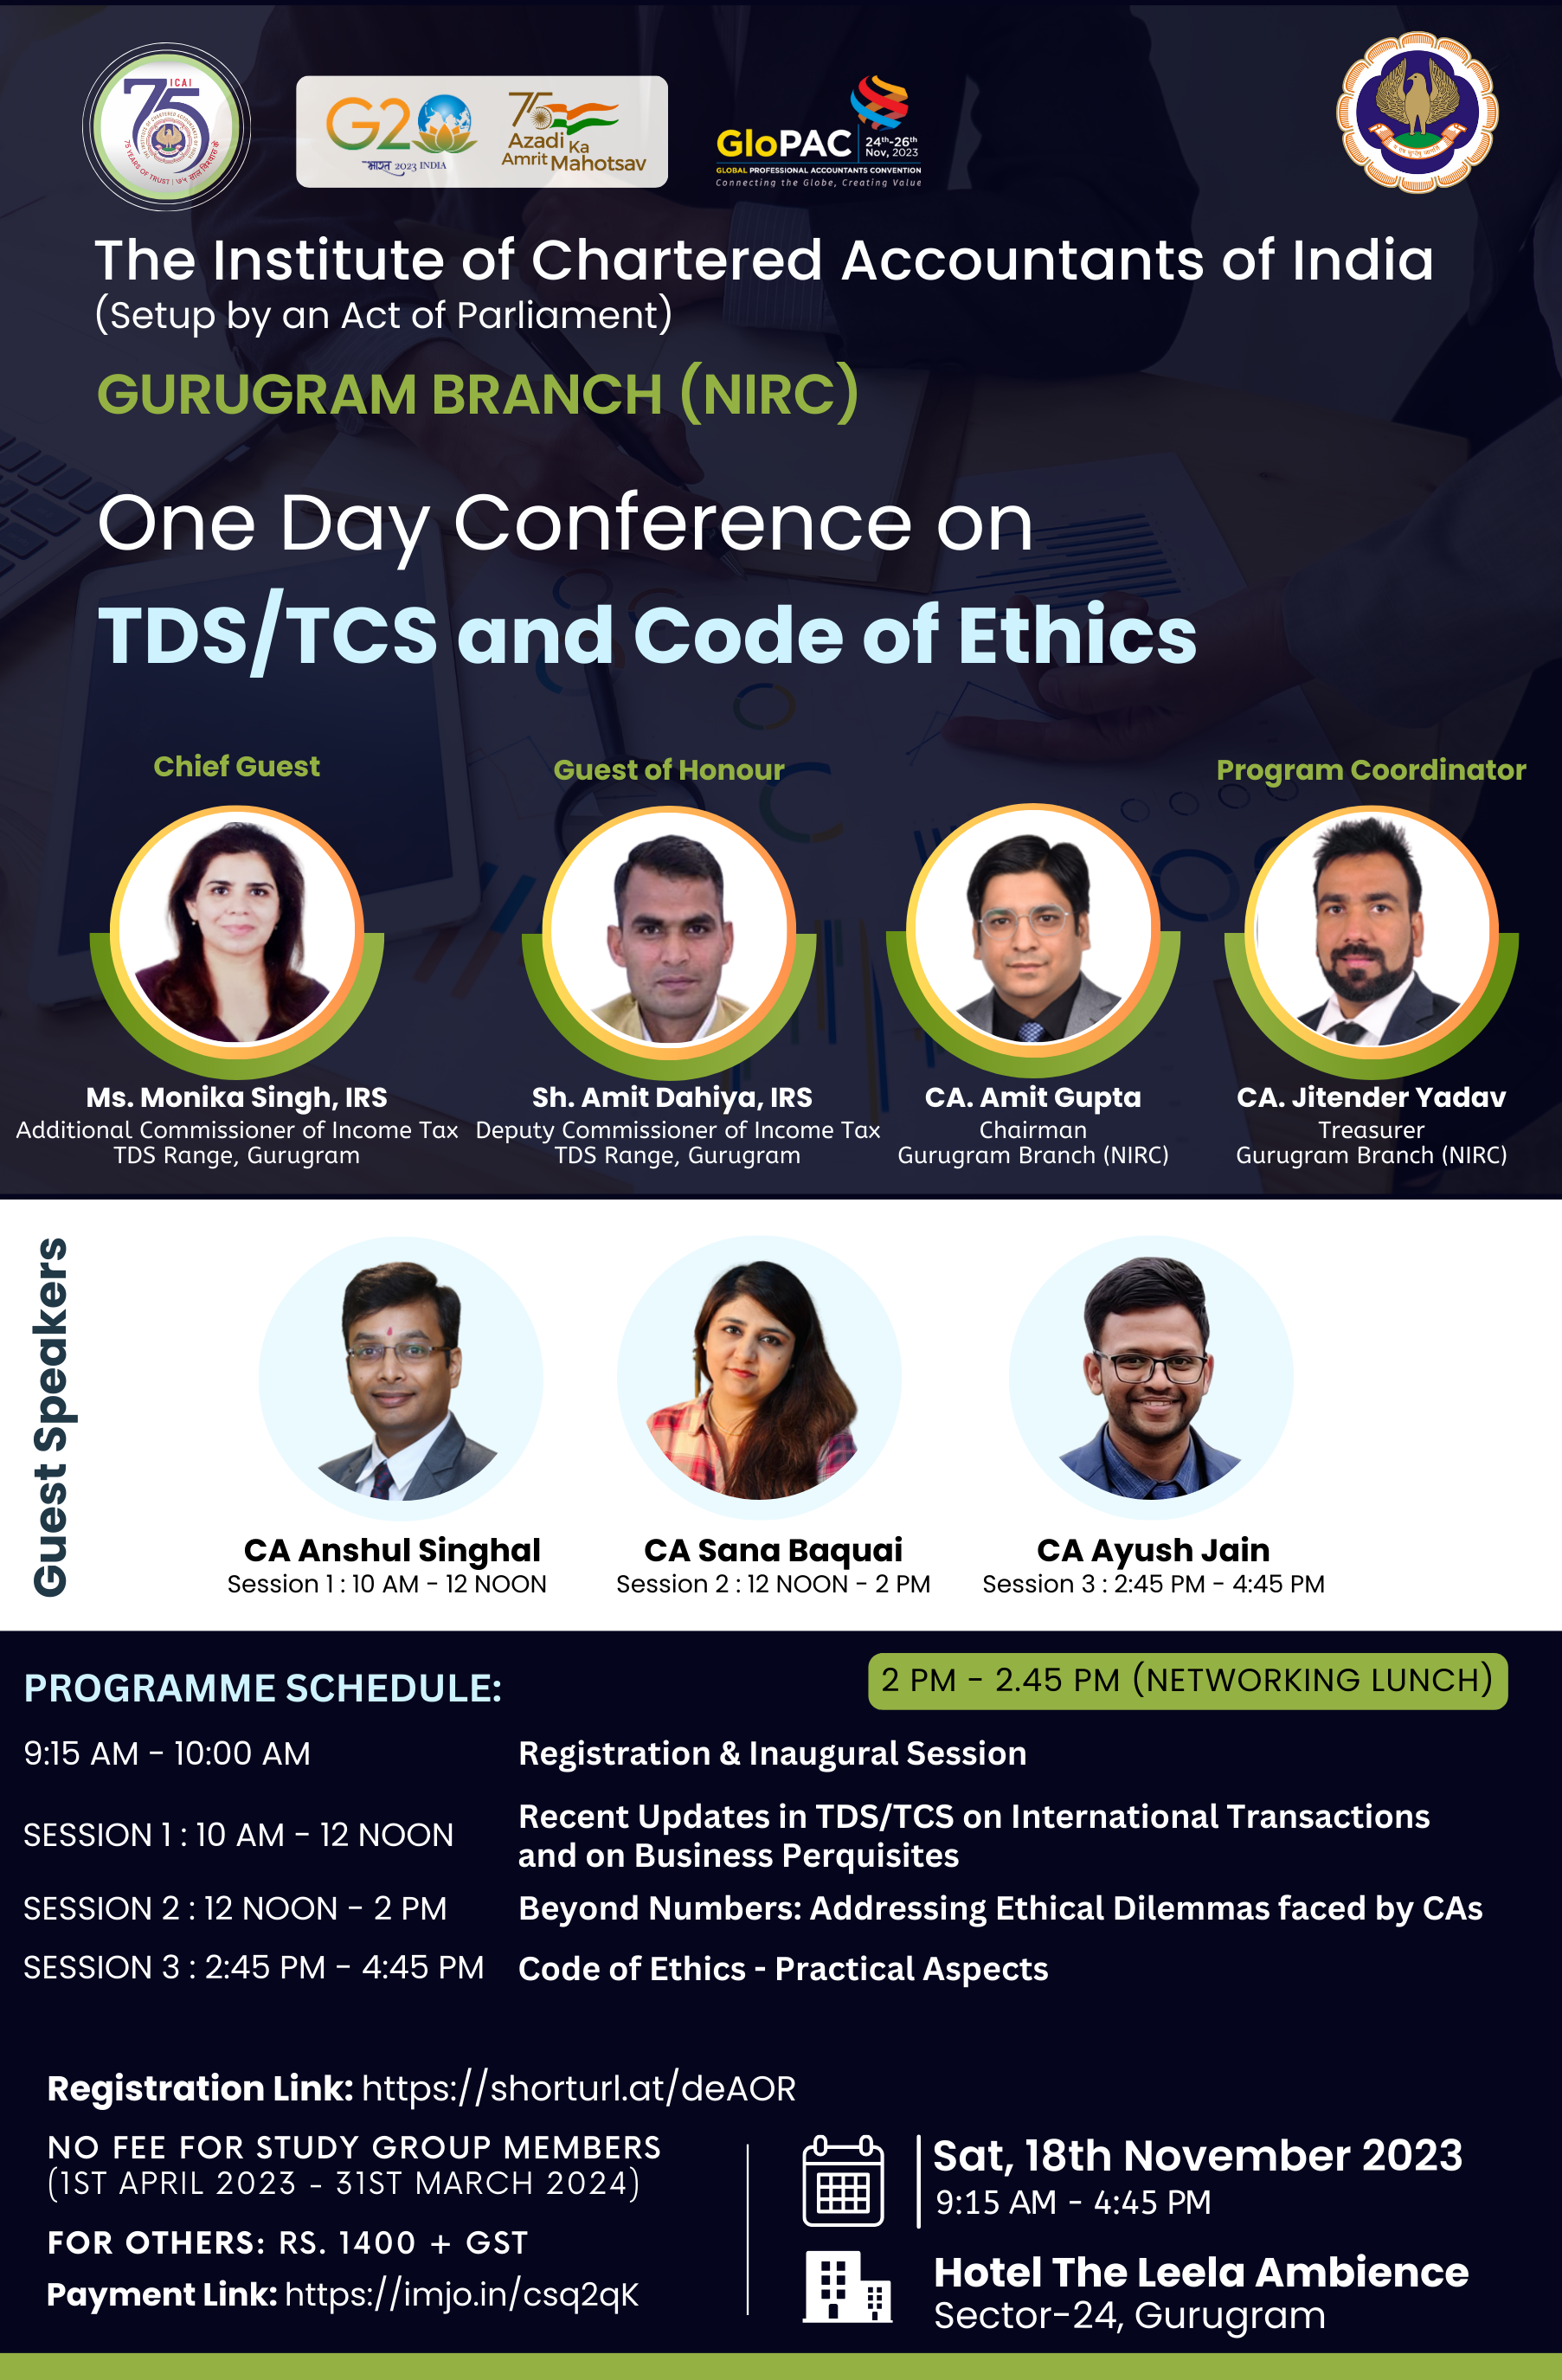 One Day Conference on TDS/TCS and Code of Ethics